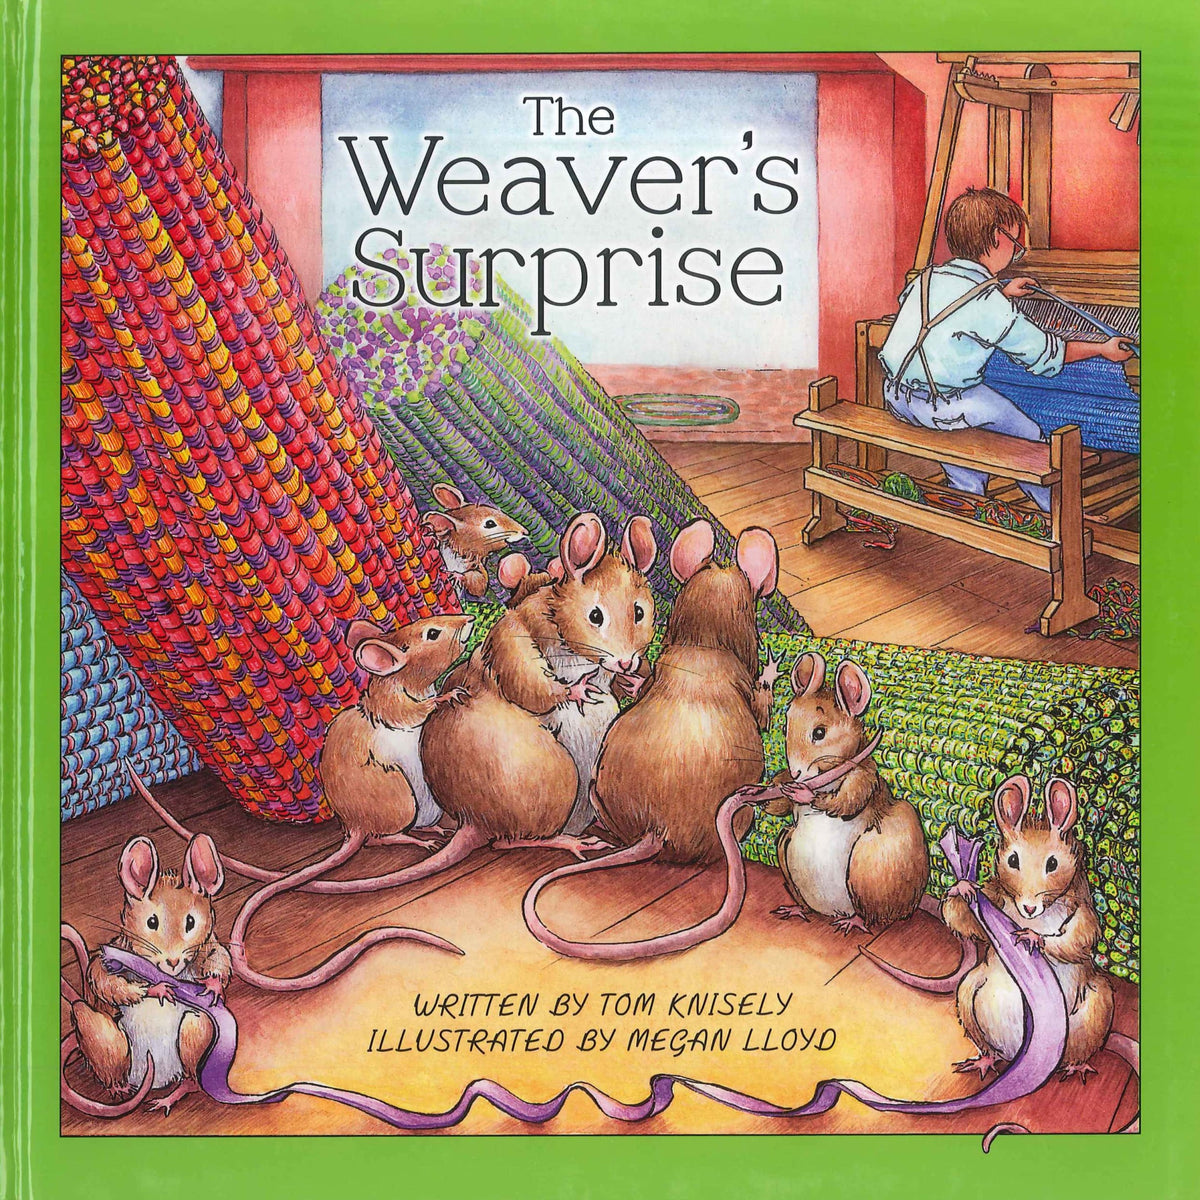 The Weavers Surprise - a childrens story